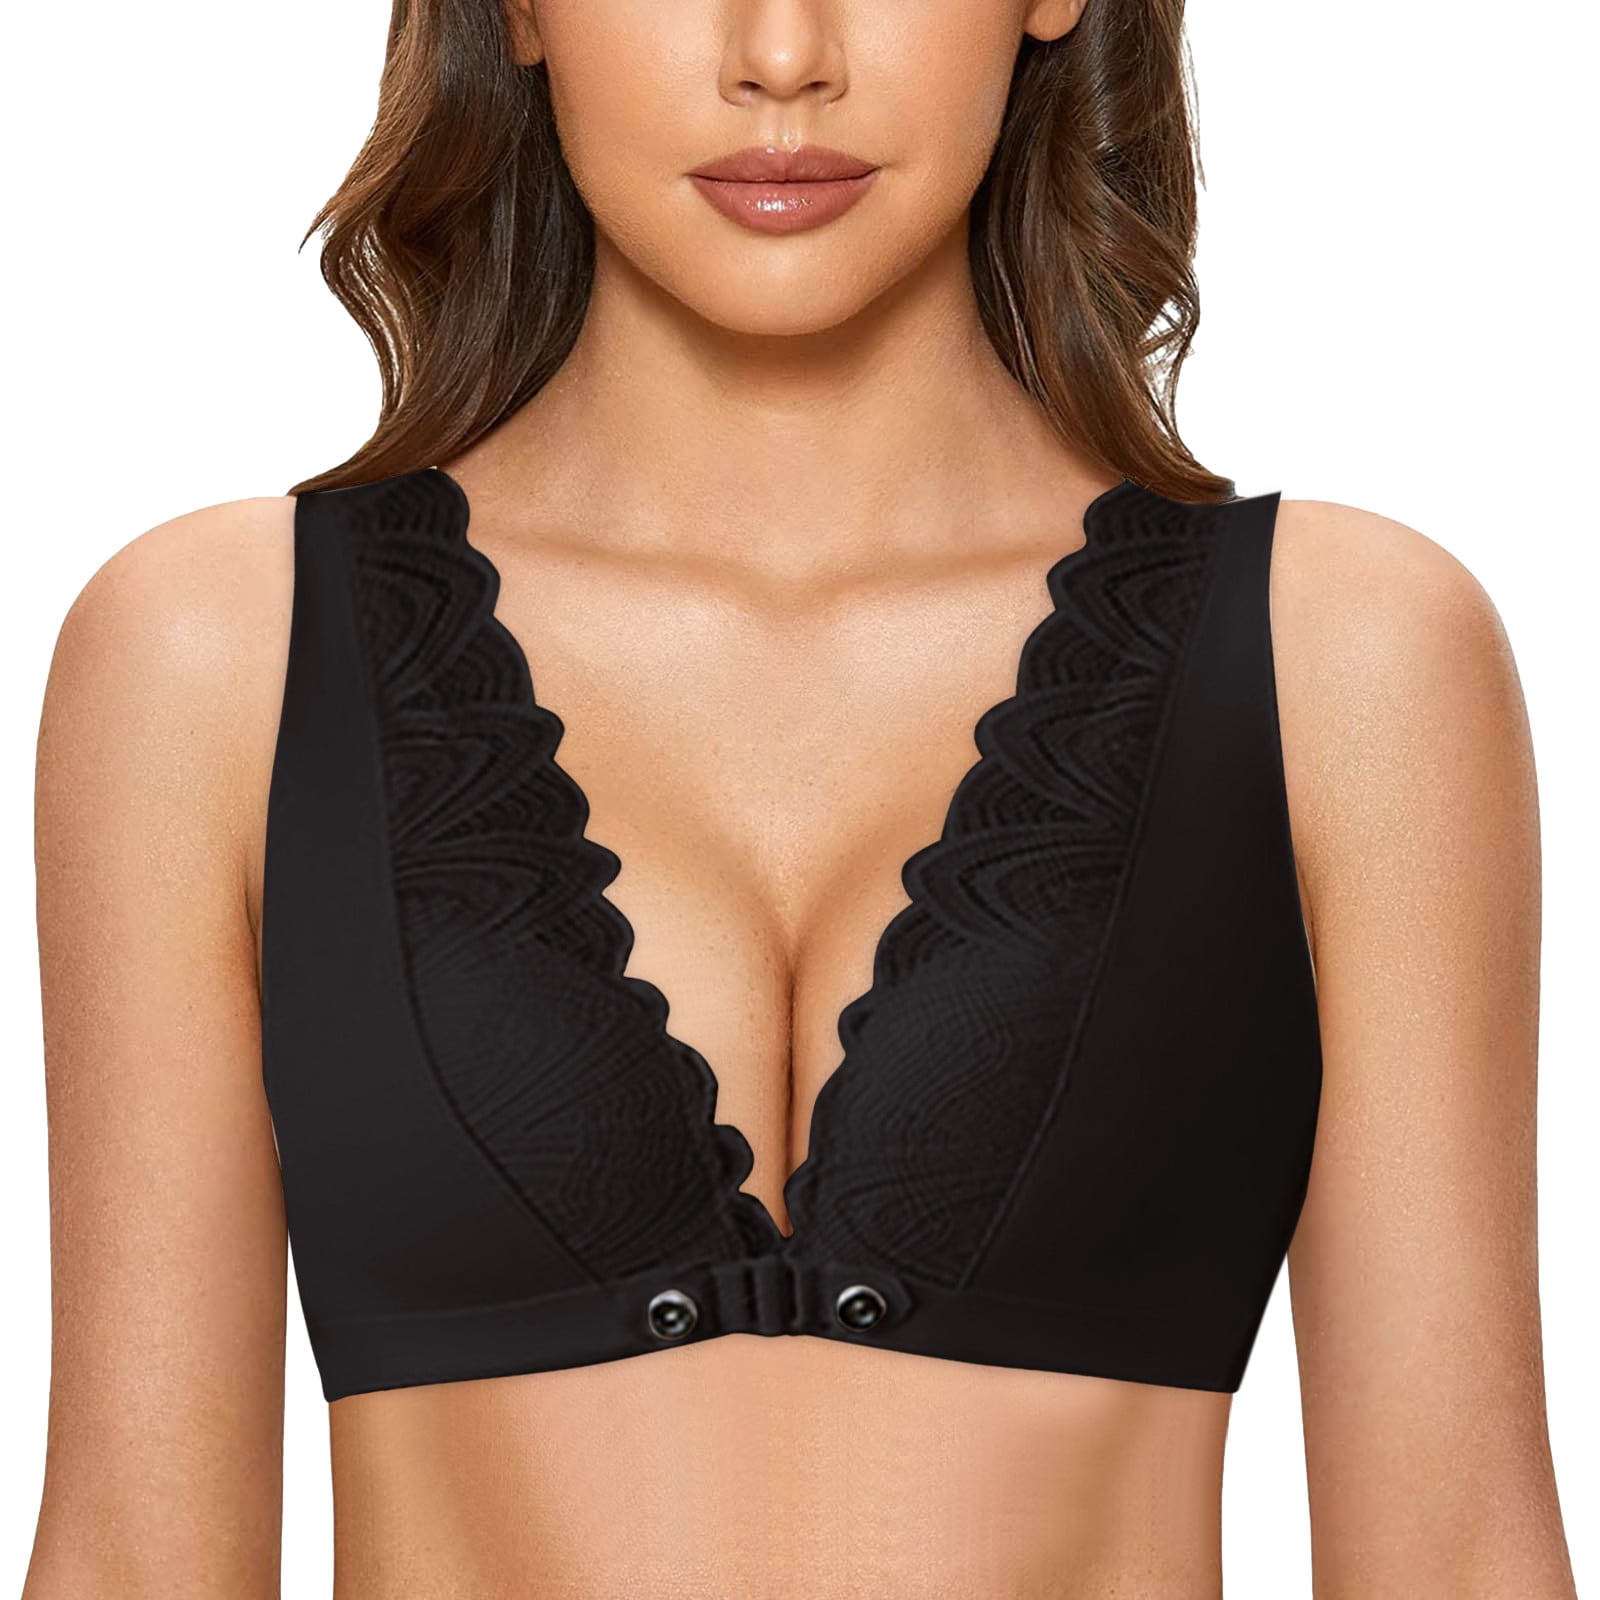 Strapless Bra Adds 2 Cup Sizes